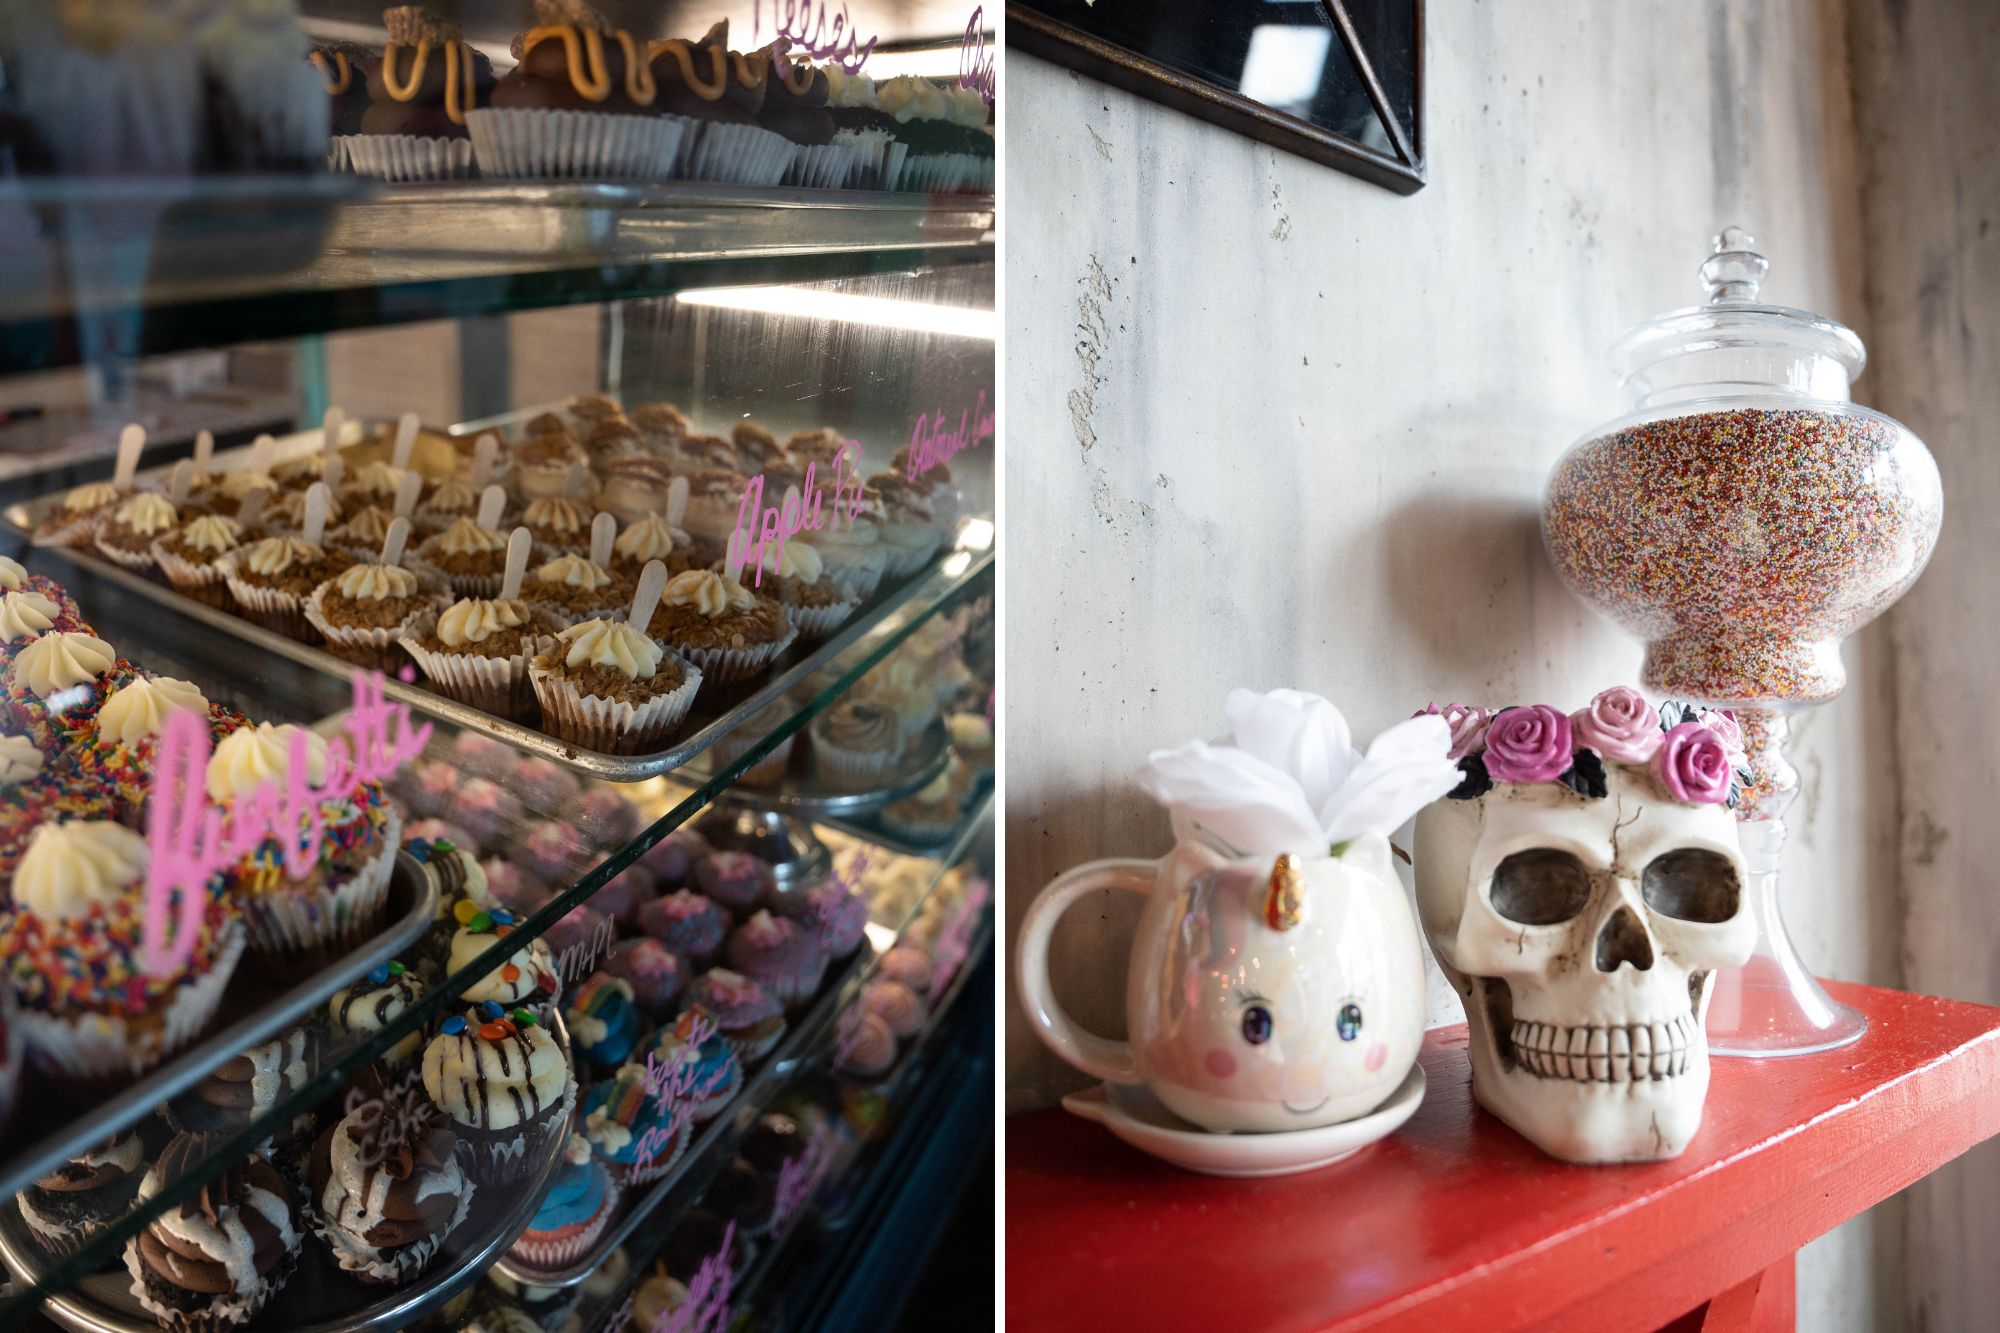 Two images. On the left is a display case filled with cupcakes, and on the right is decor on a shelf, including a sugar skull, unicorn mug, and a jar of nonpareils 